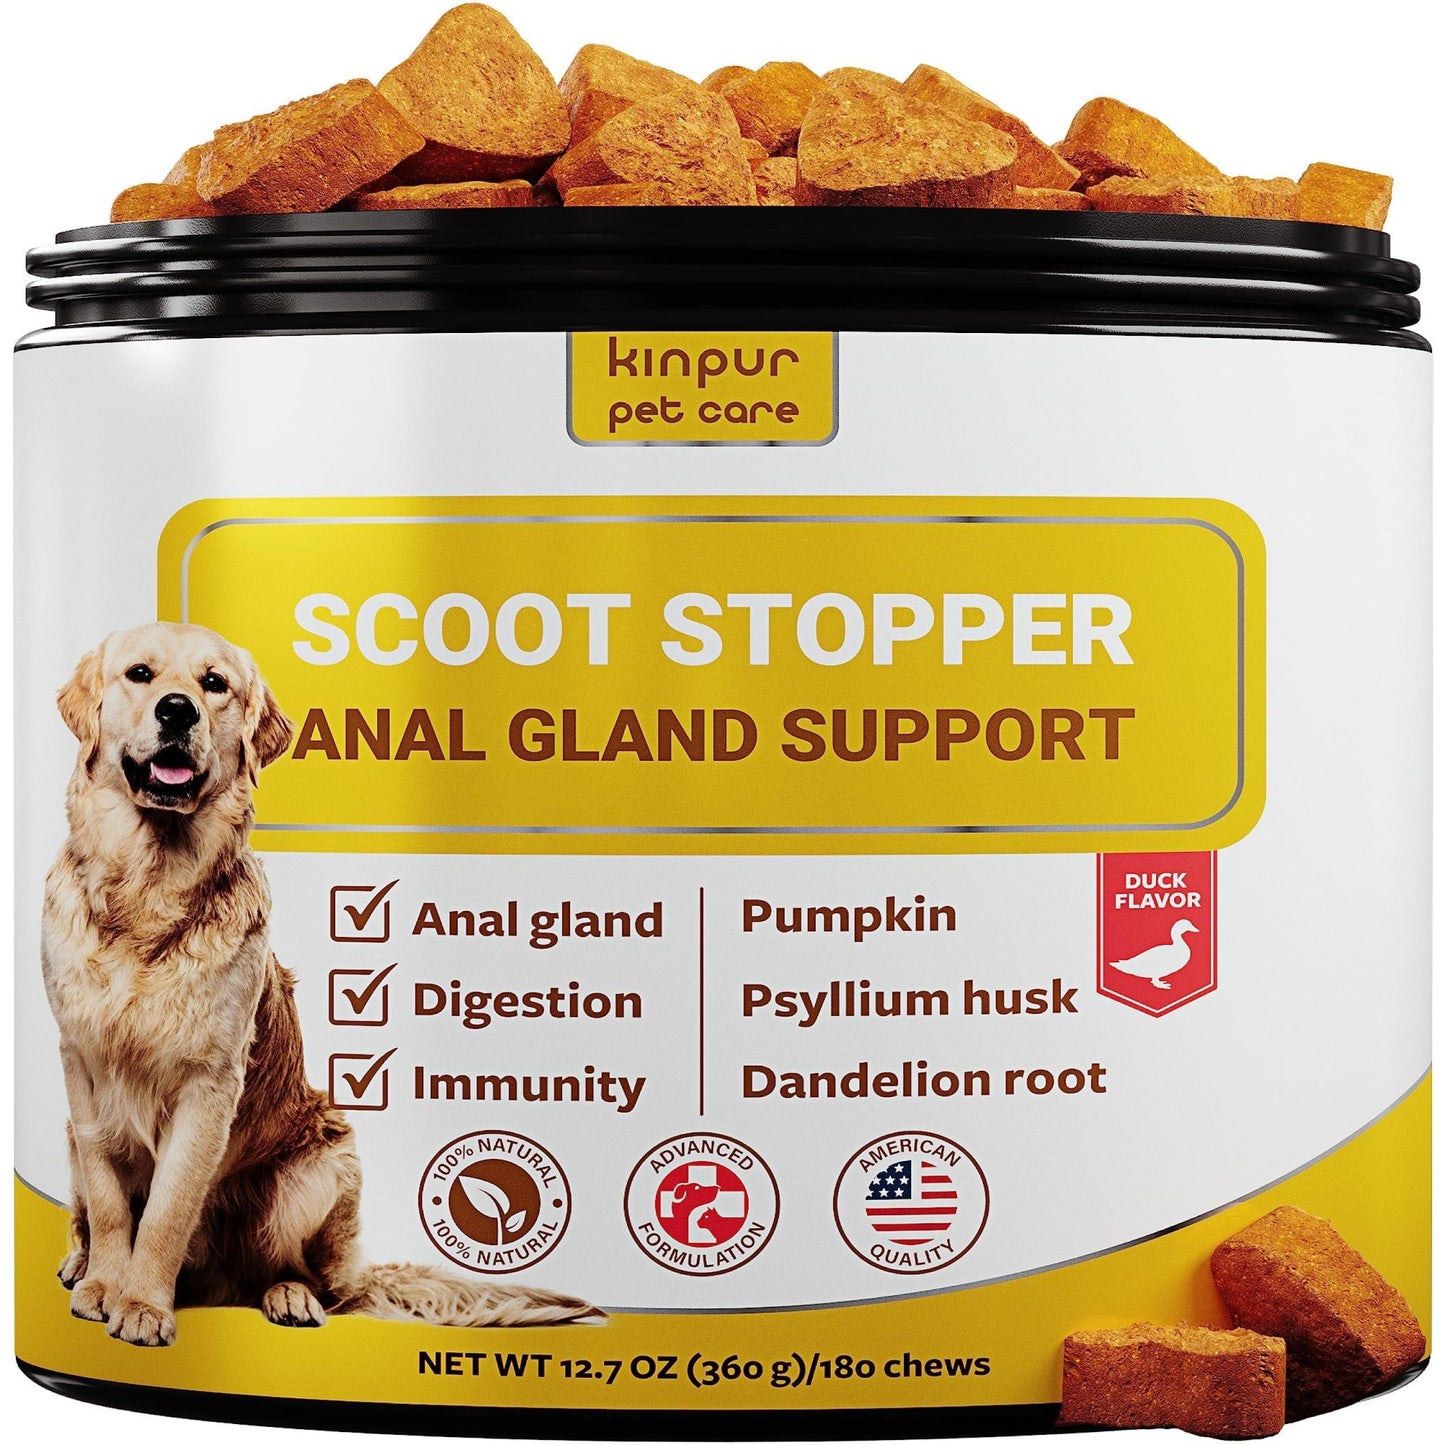 Scoot Stopper Soft Chews Fiber for Dogs Dog Anal Gland and Digestion Support Anal Gland Chews with Pumpkin and Psyllium Husk 180 Chewables for Dog Digestive Health